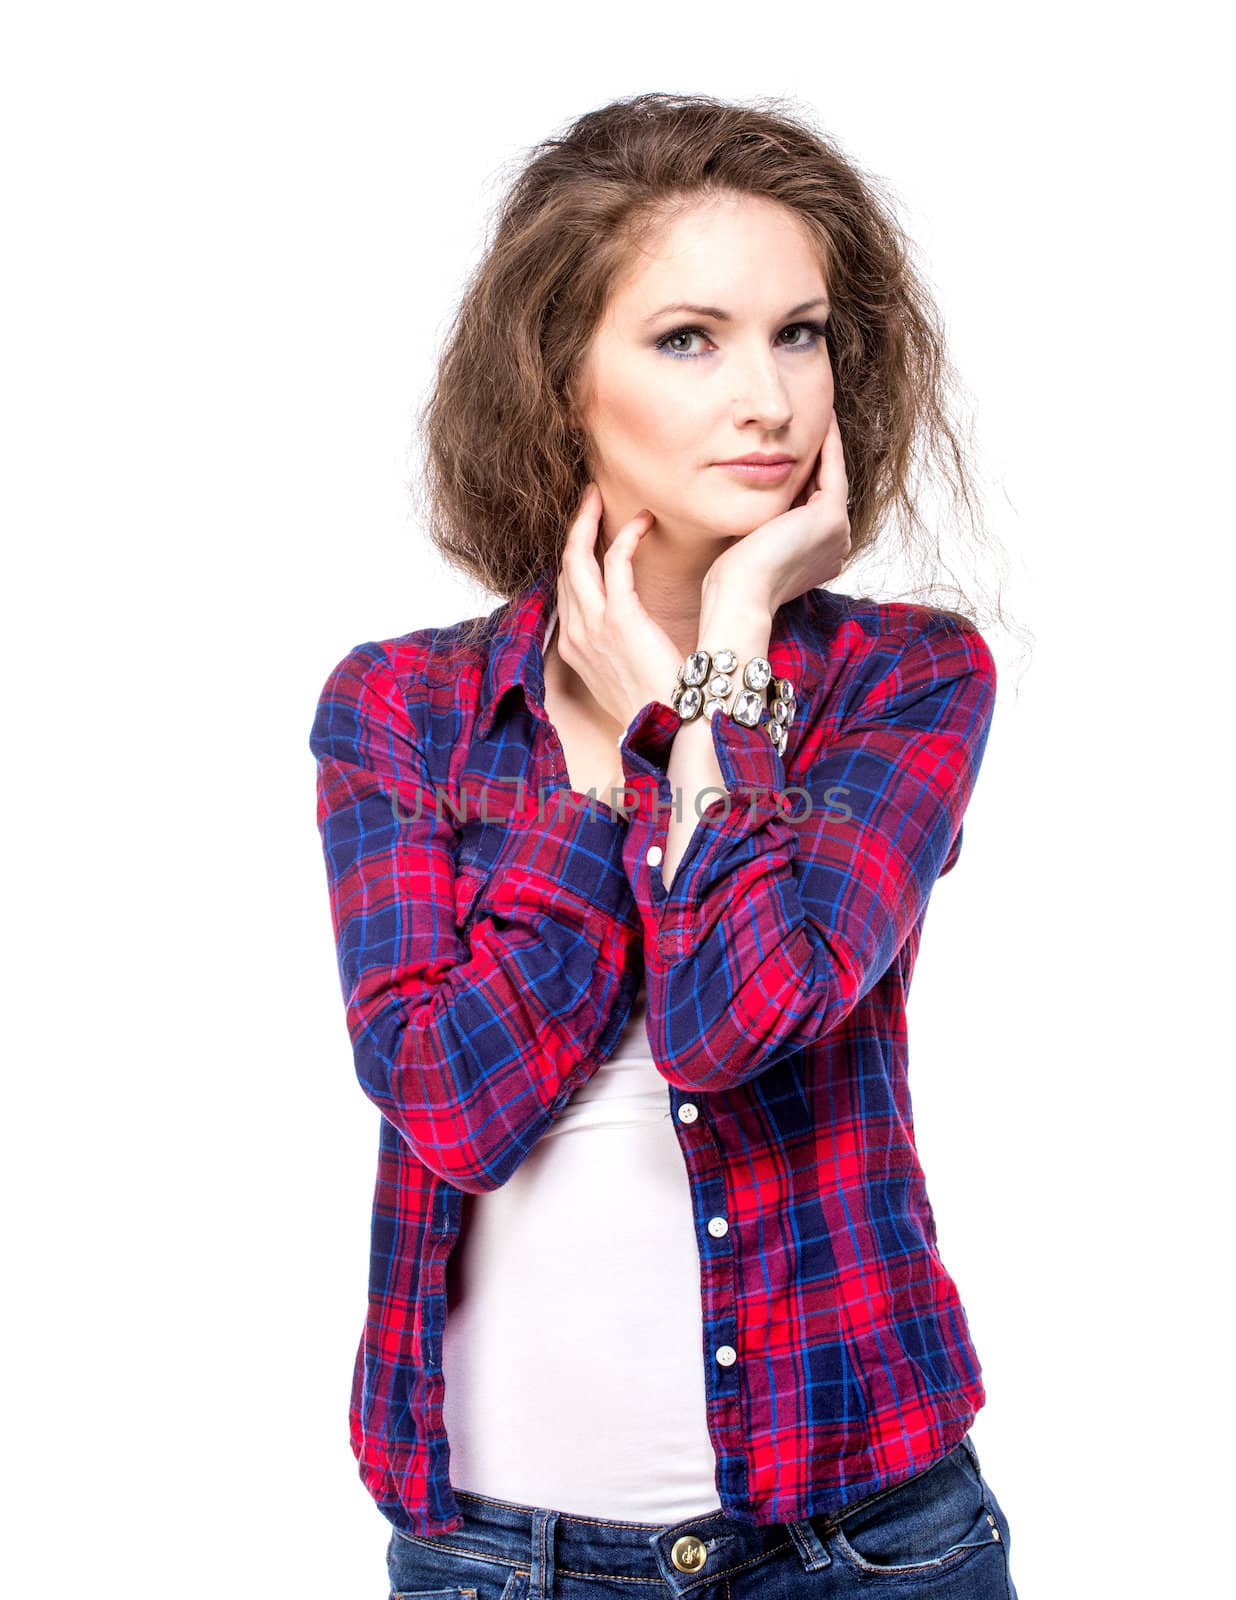 Attractive young woman in a checkered shirt, isolated